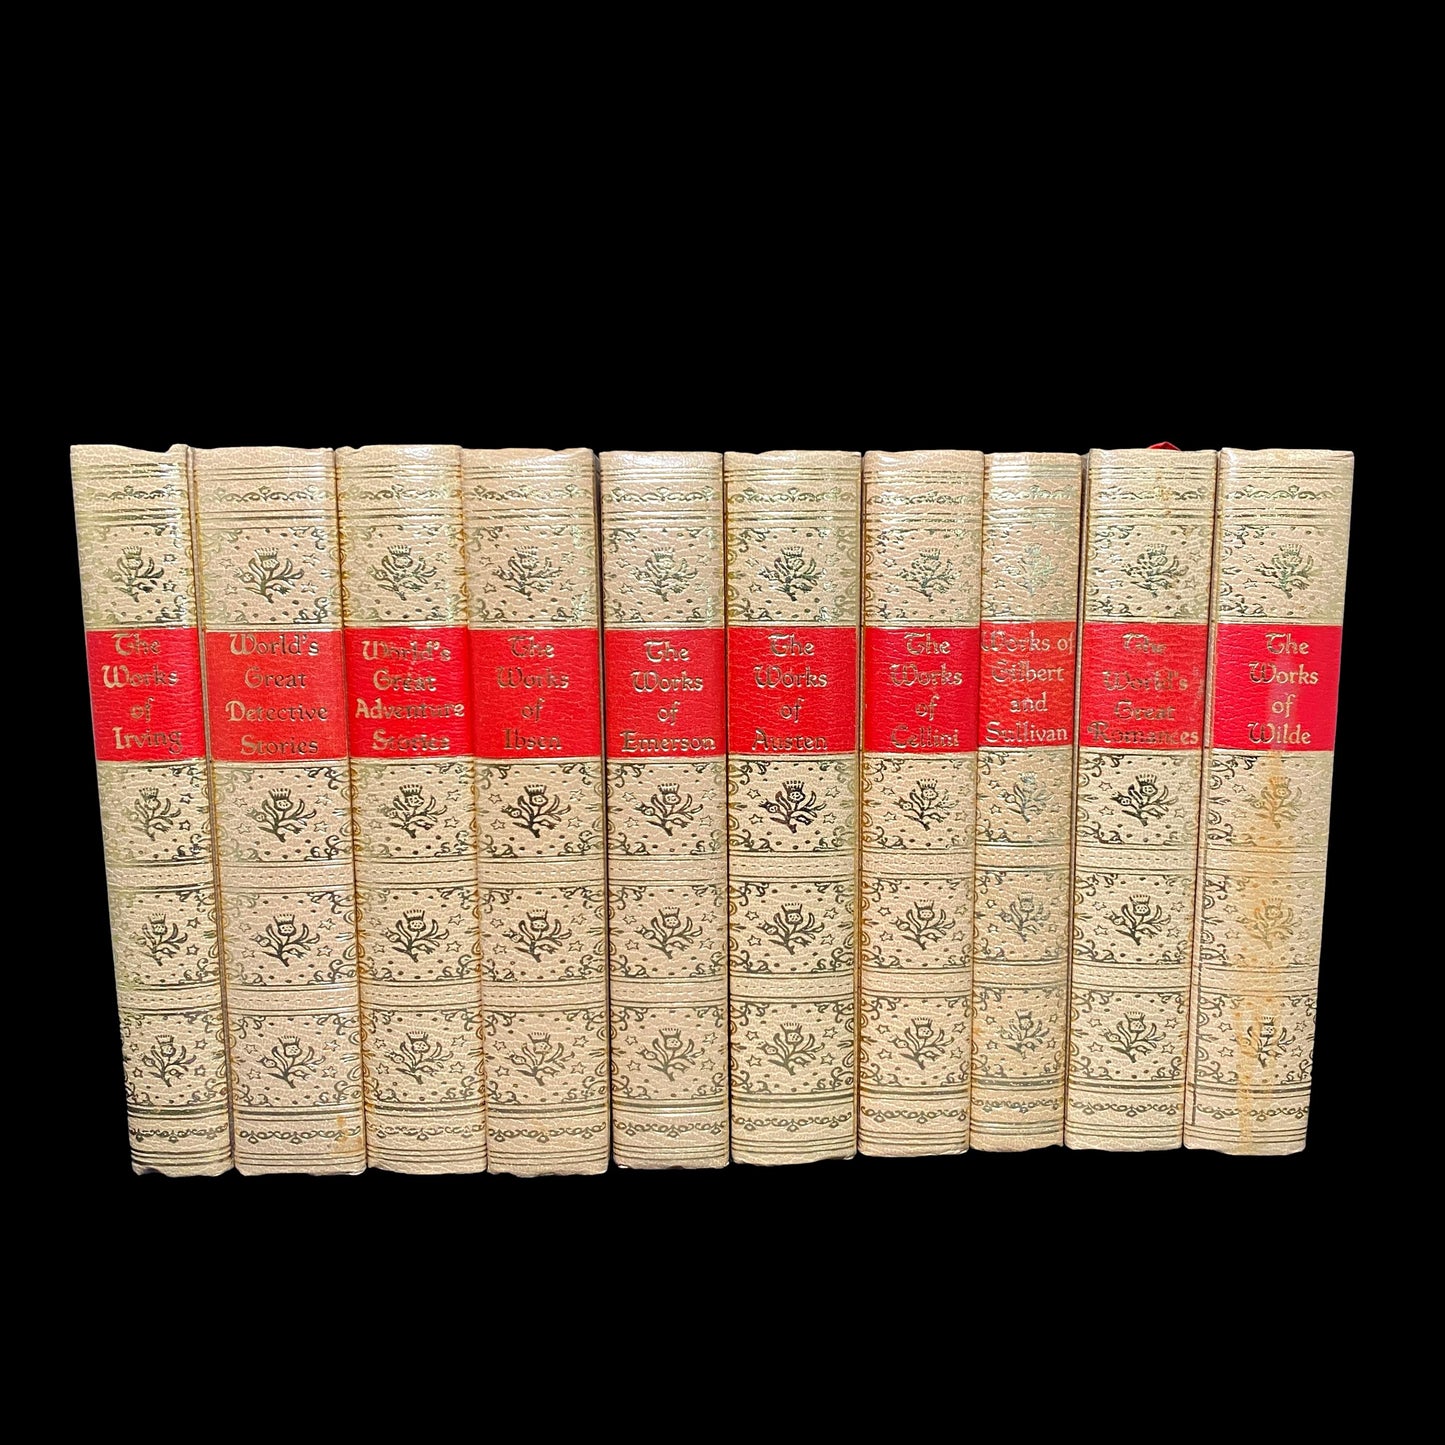 Black's Readers Service Classical Authors Collection, 57 Volumes